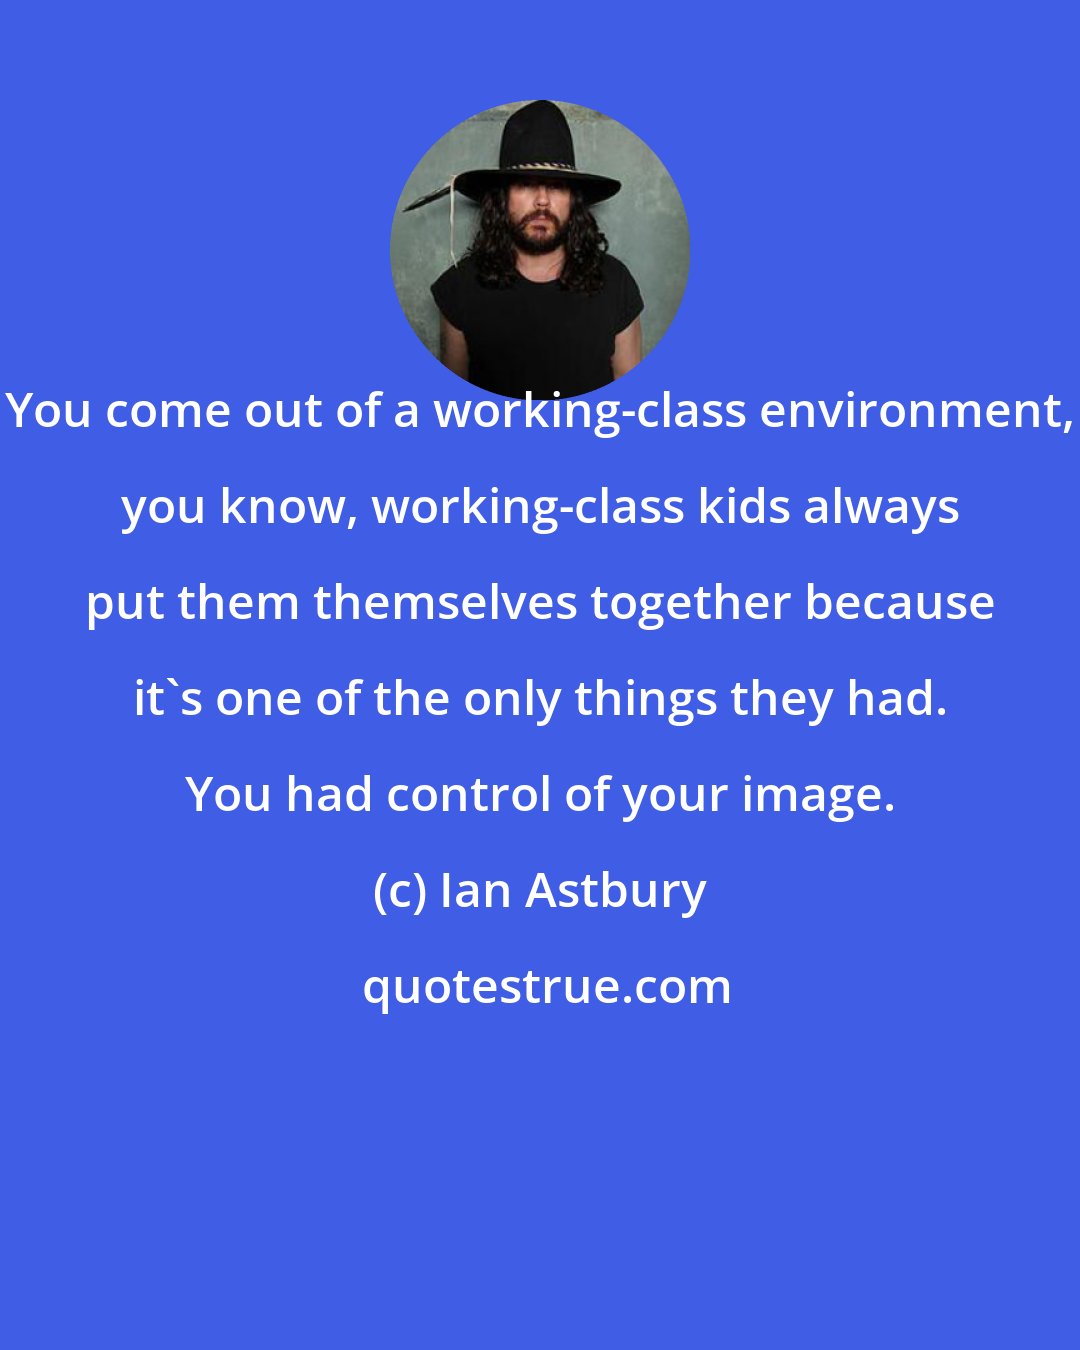 Ian Astbury: You come out of a working-class environment, you know, working-class kids always put them themselves together because it's one of the only things they had. You had control of your image.